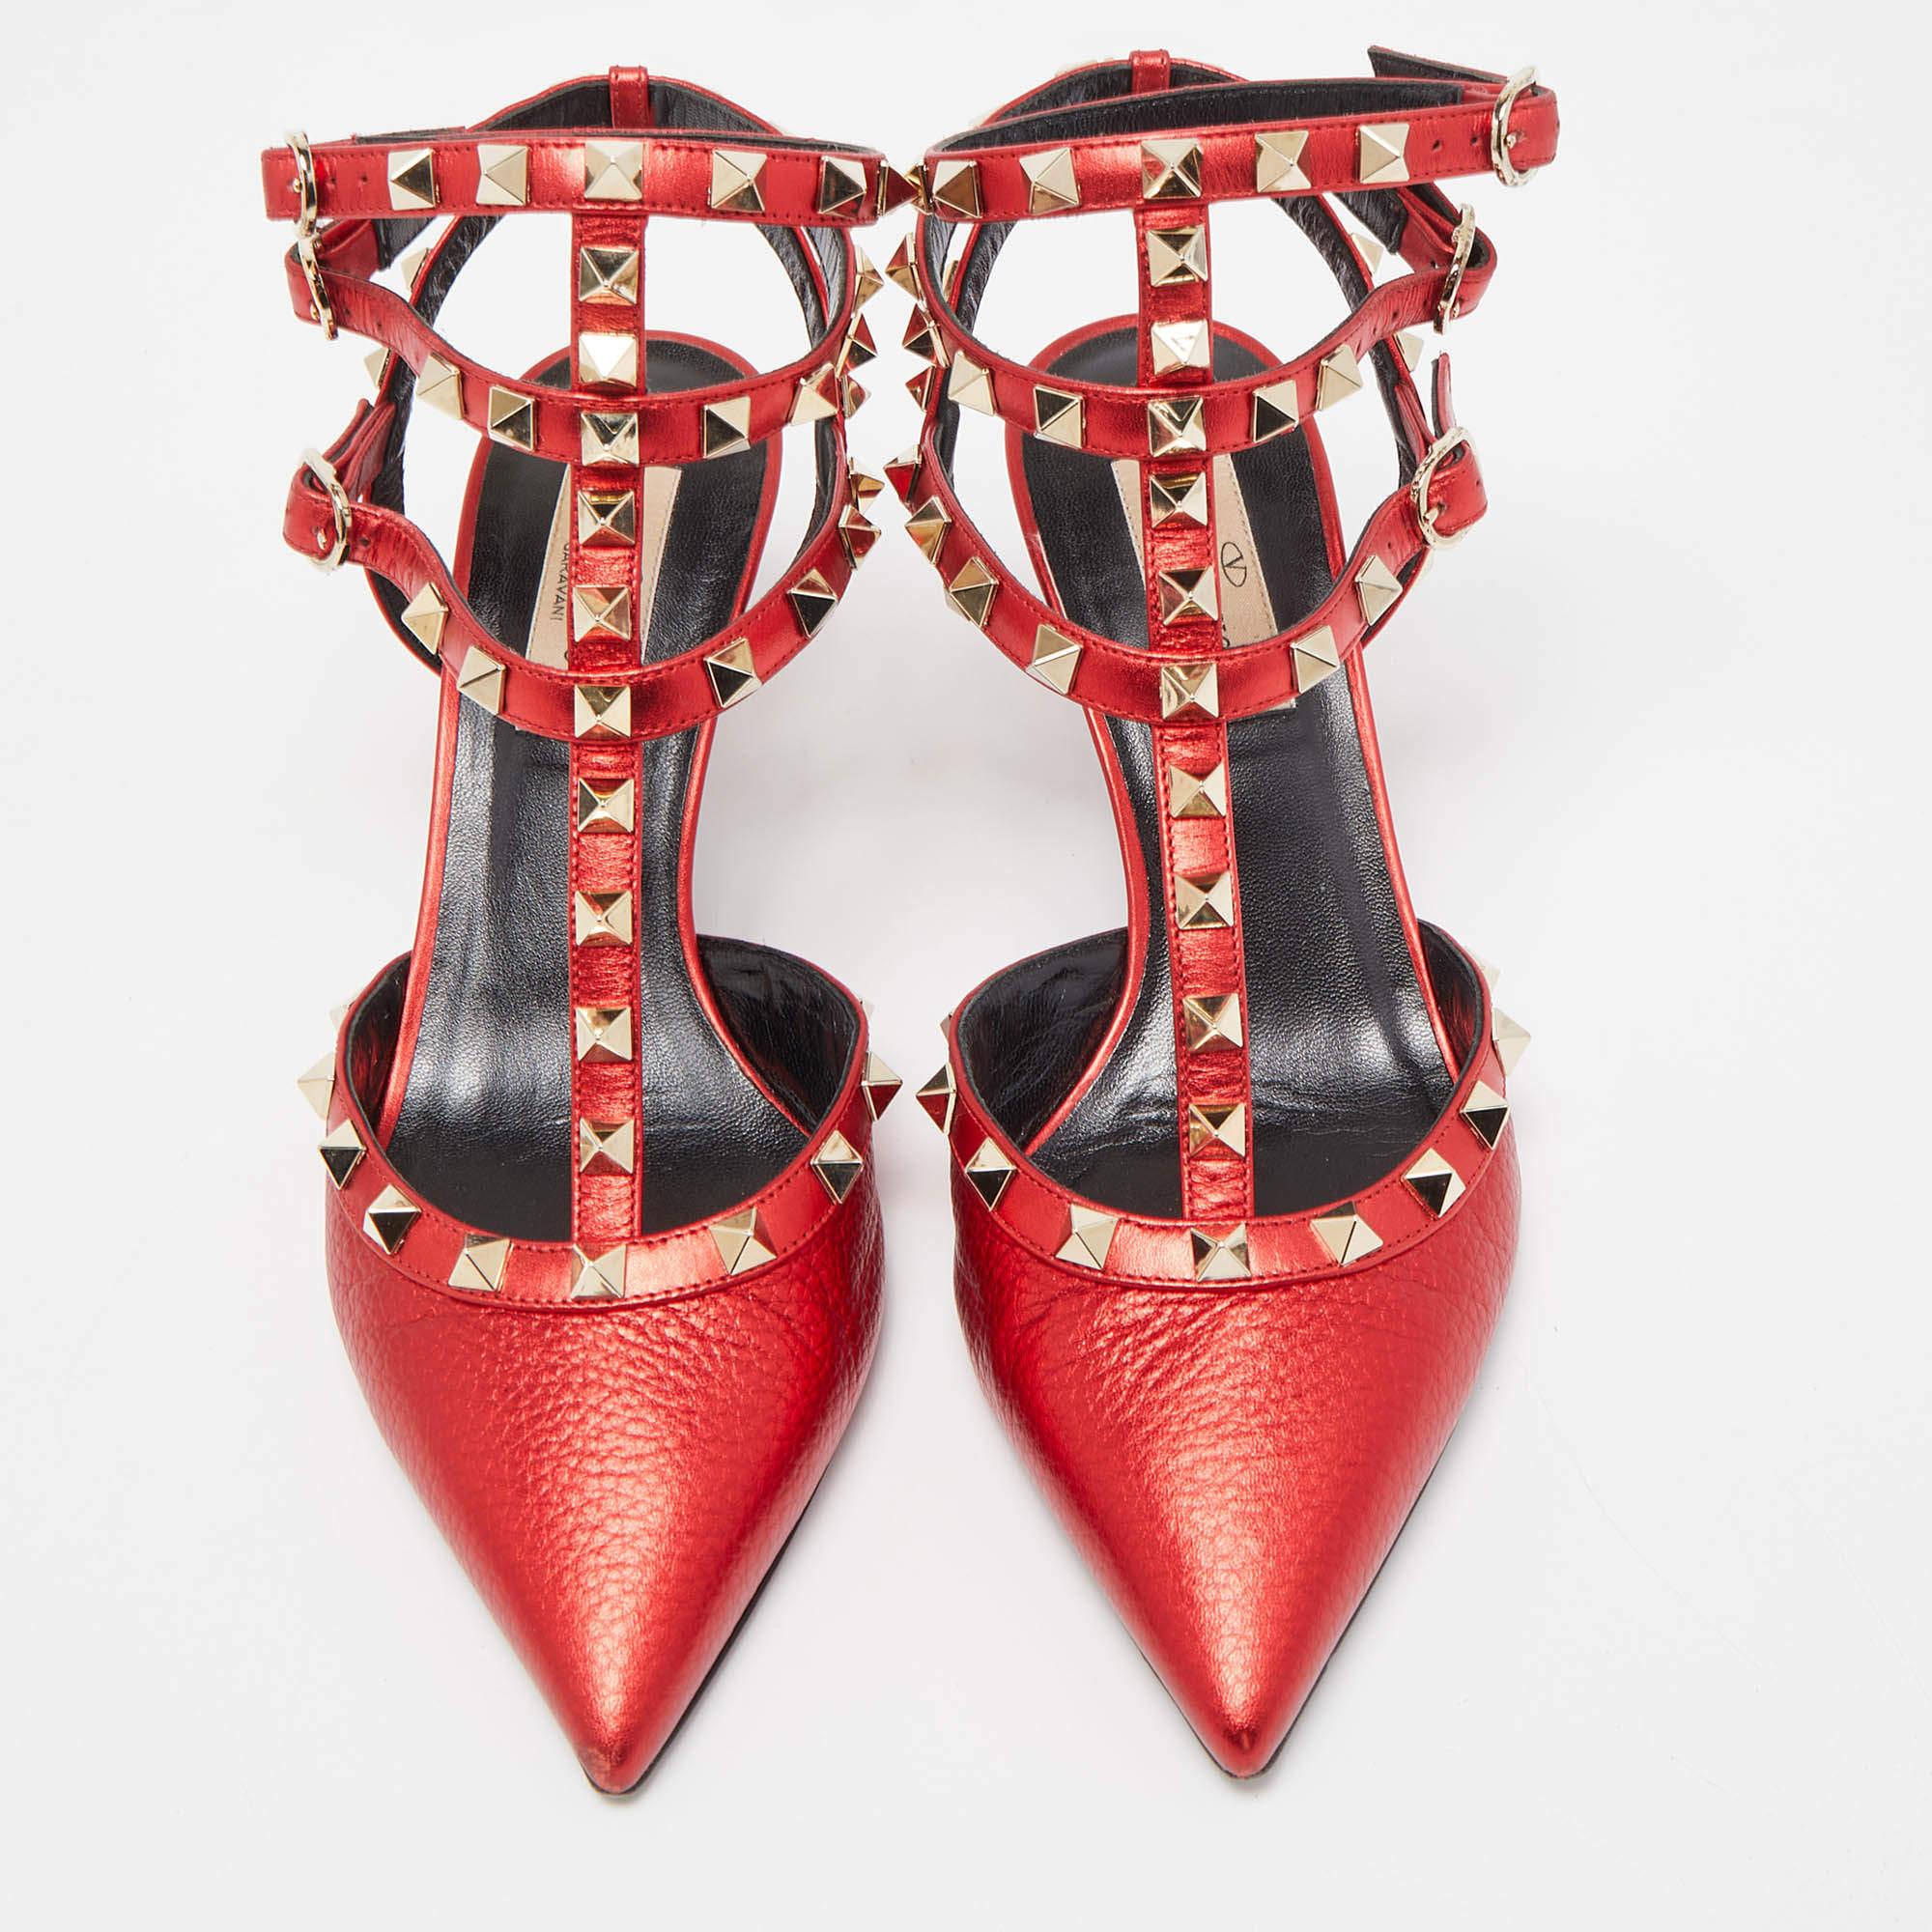 When considering Valentino, three words come to mind: luxurious, bold, and iconic. These gorgeous shoes are crafted from prime quality materials, and the sleek silhouette is adorned with carefully placed Rockstuds. They can be styled with various